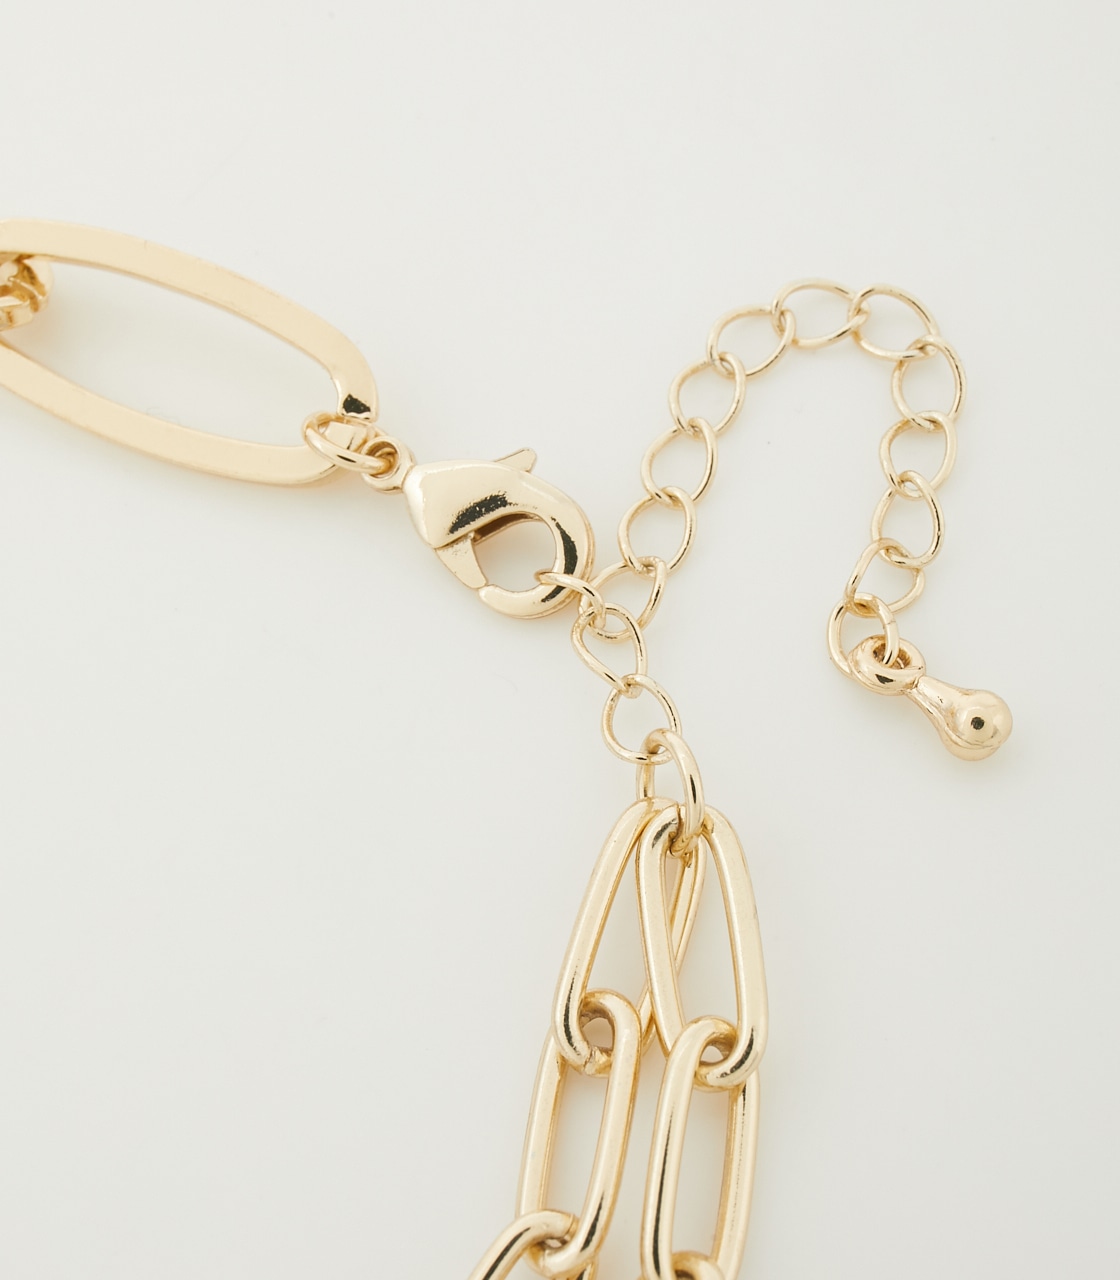 LINK CHAIN NECKLACE/リンクチェーンネックレス 詳細画像 L/GLD 6